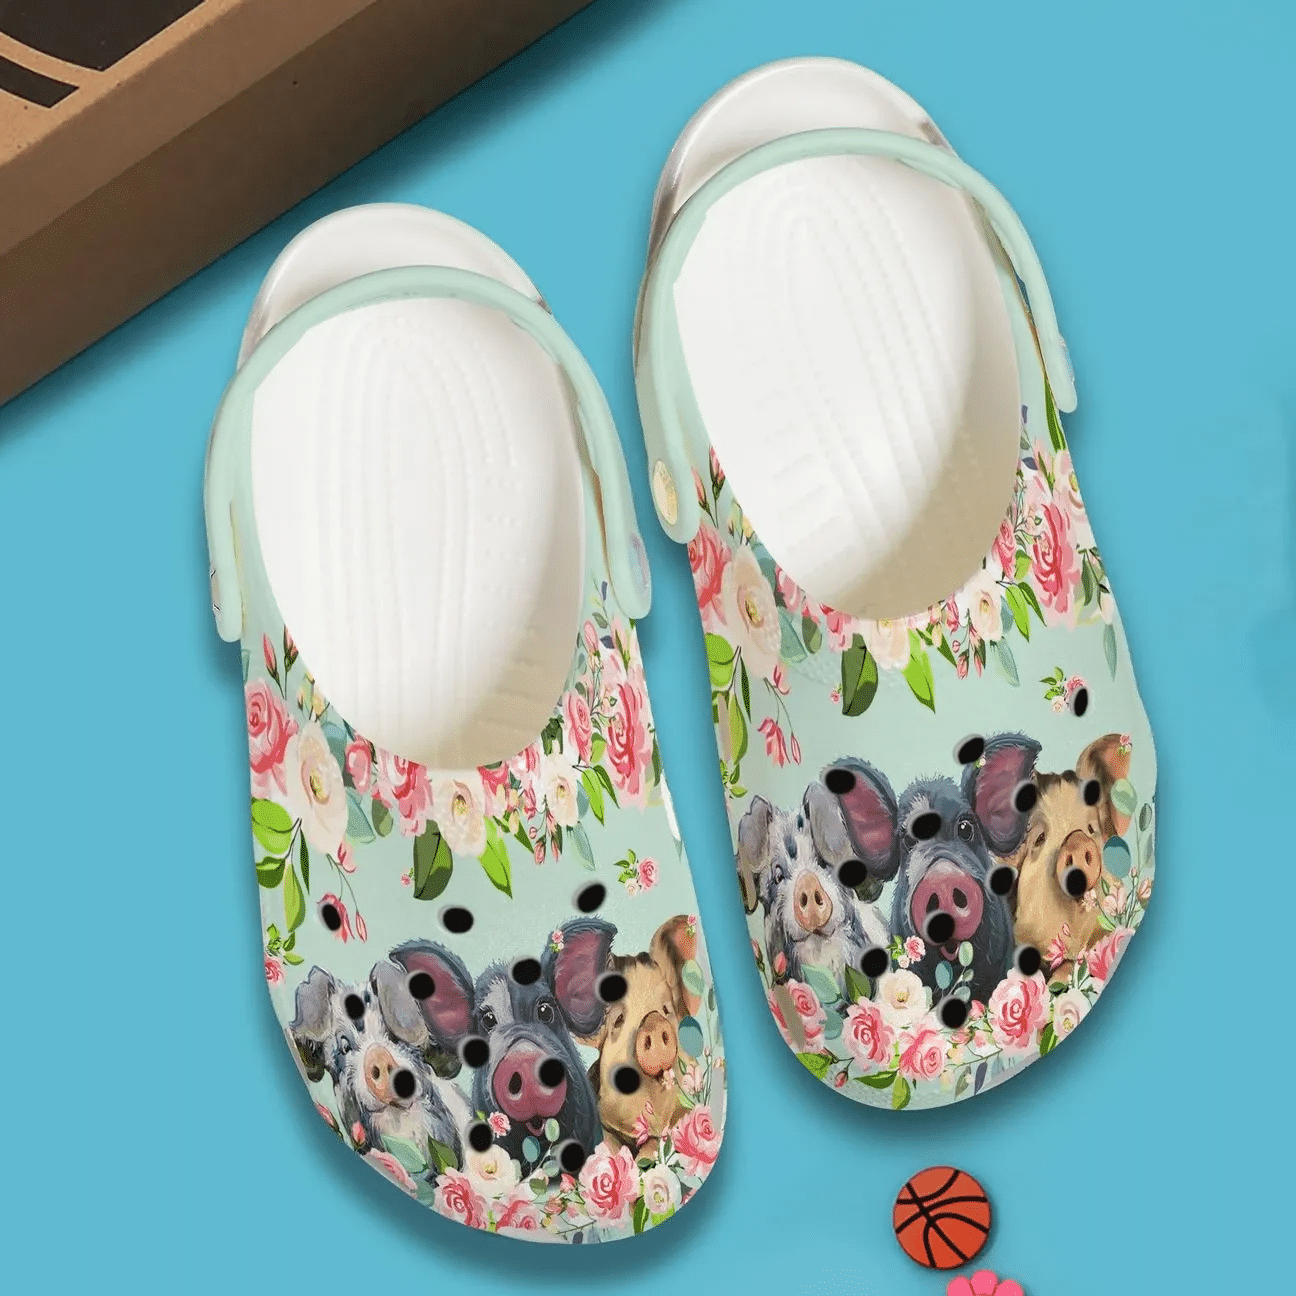 Pig Personalized Clog Custom Crocs Comfortablefashion Style Comfortable For Women Men Kid Print 3D Pigs And Flowers